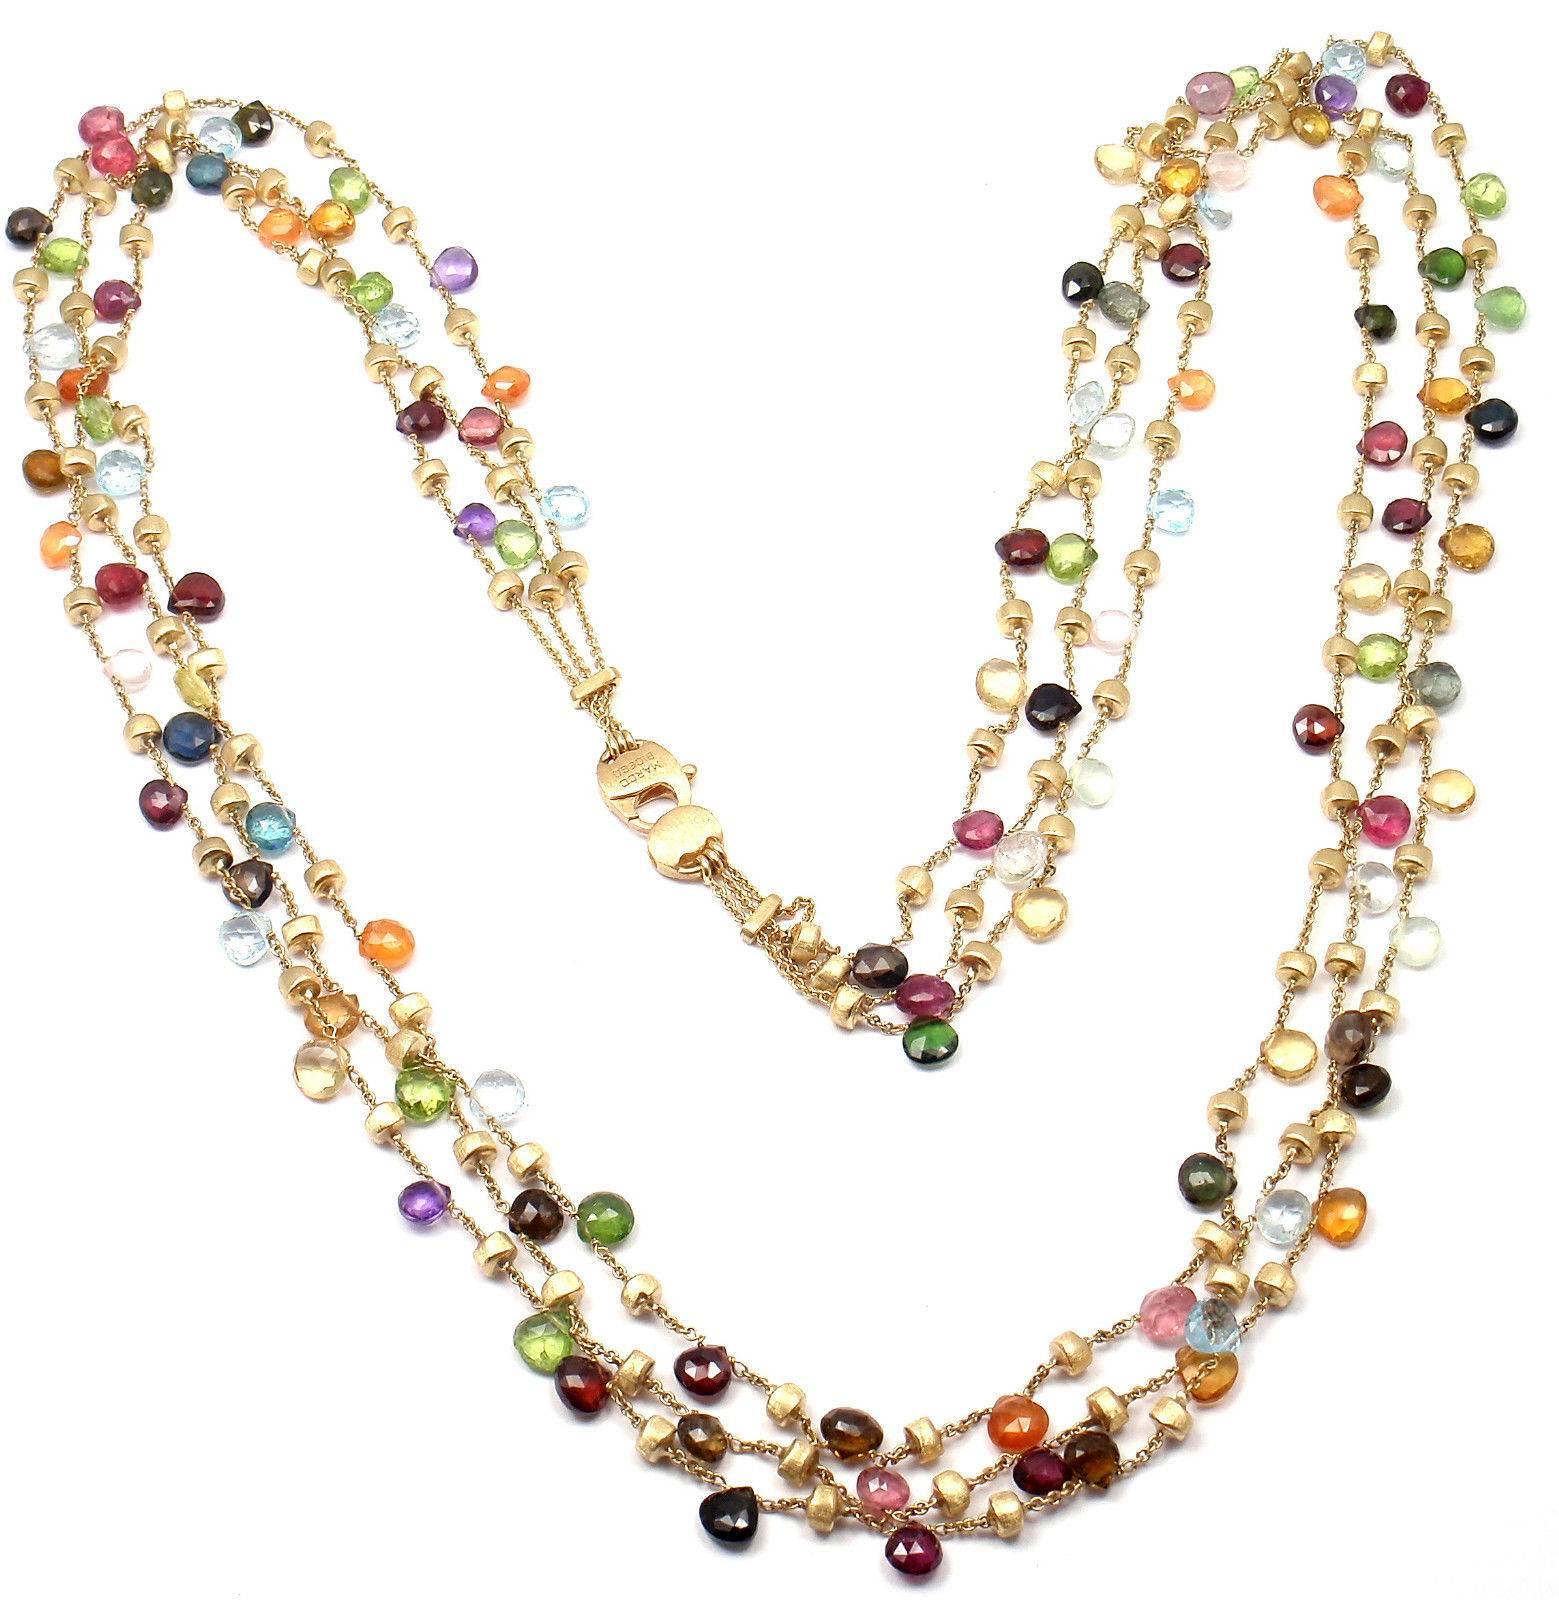 Marco Bicego Paradise 3-Row Multicolor Gemstone 32 Inch Long Gold Necklace 6